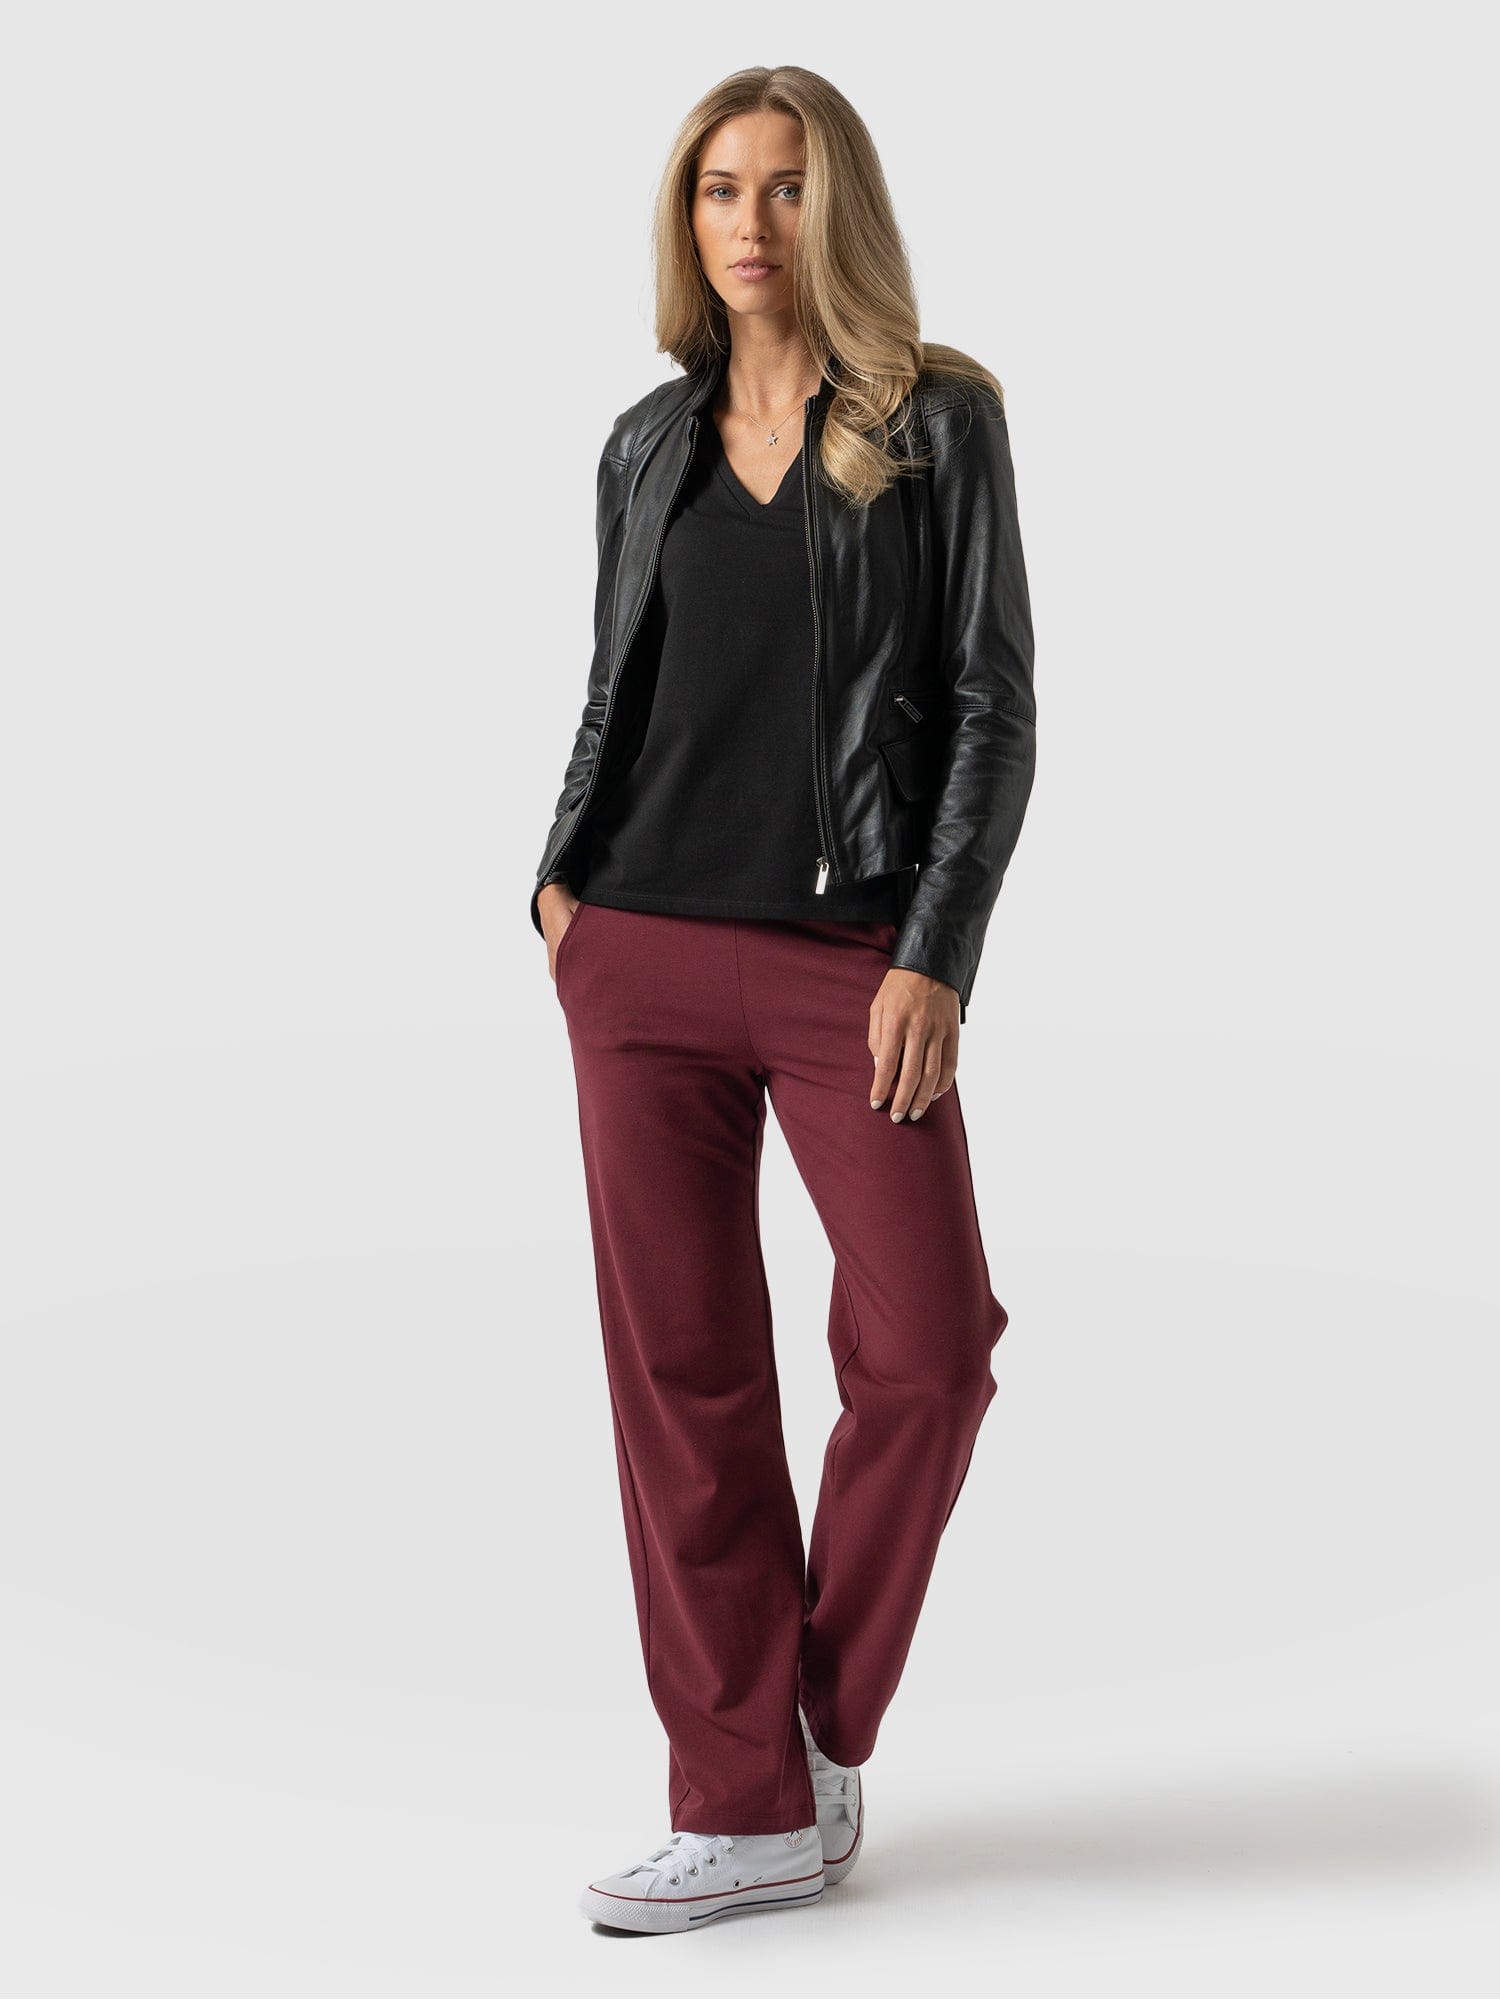 Mom's Complete Guide to Styling Burgundy Pants (with free printable!) -  Easy Fashion for Moms